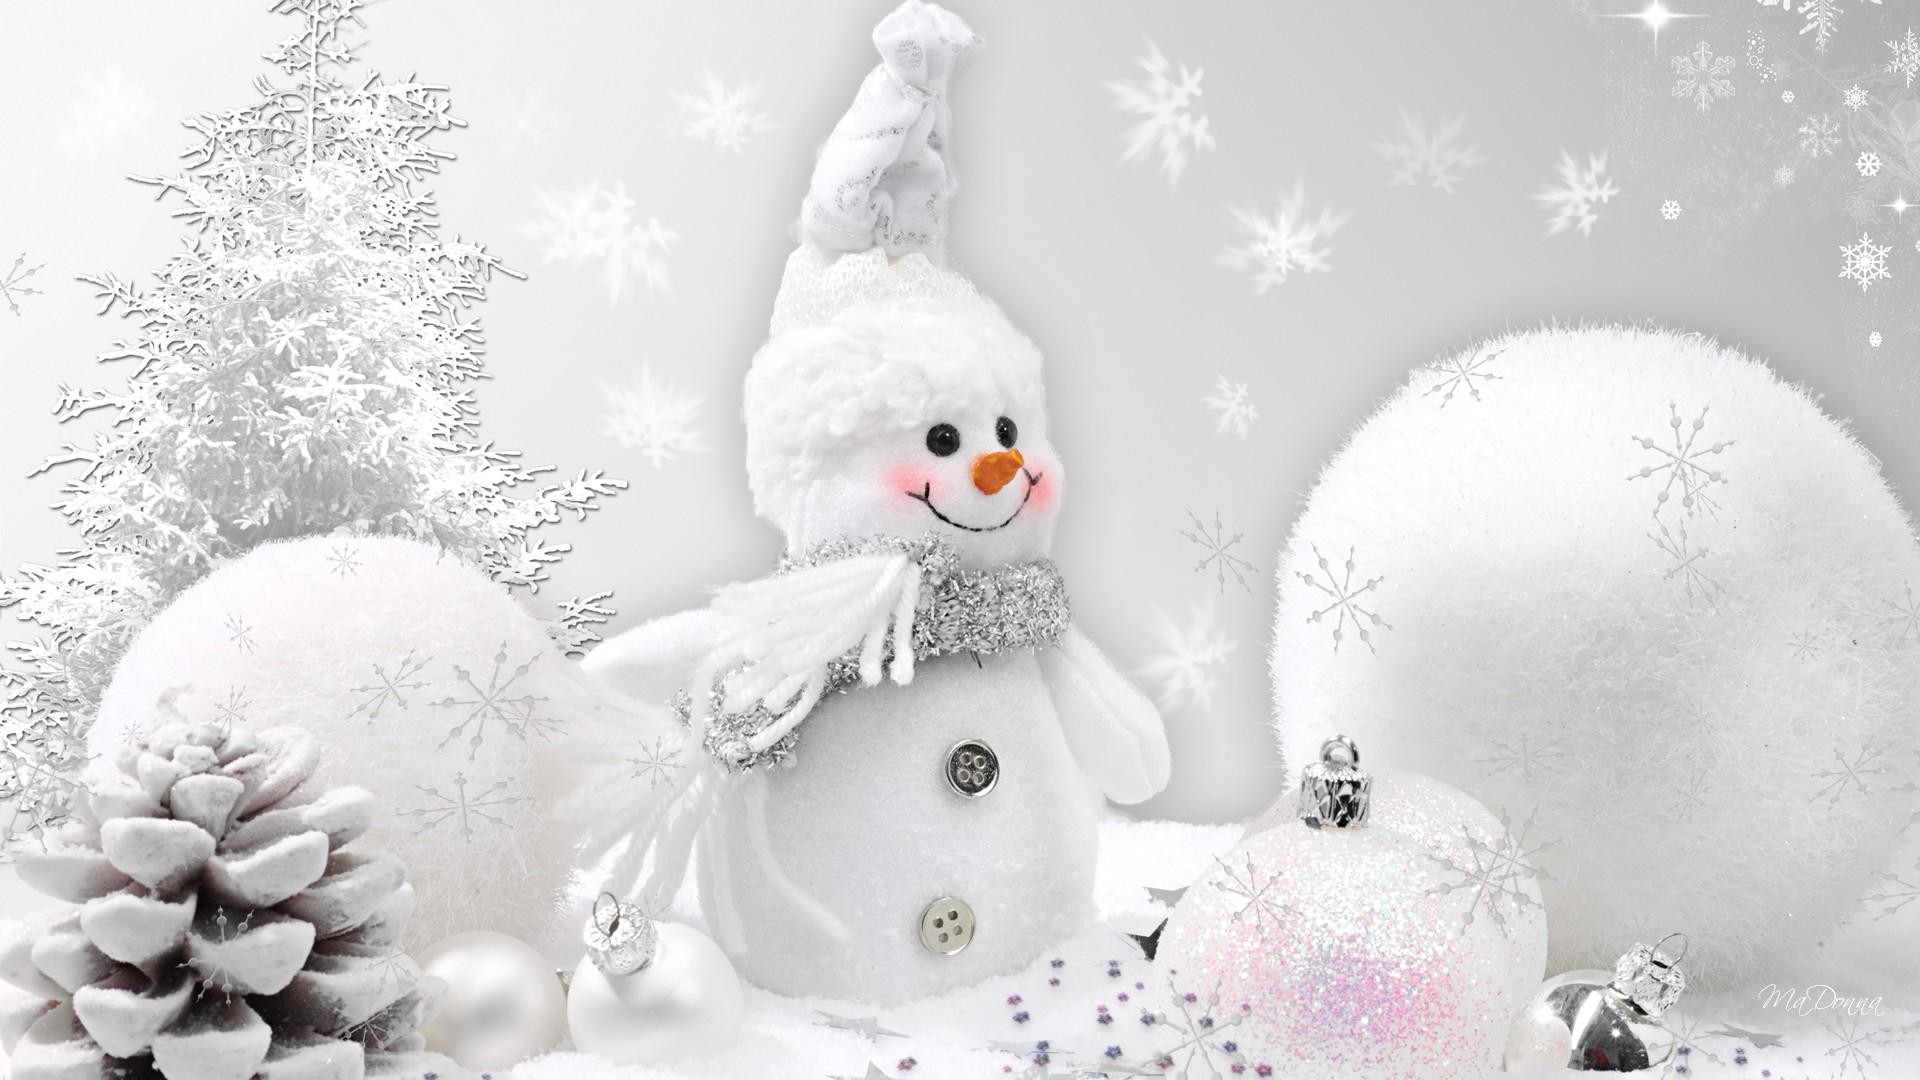 Country Snowman Wallpaper Free Wallpapers Image